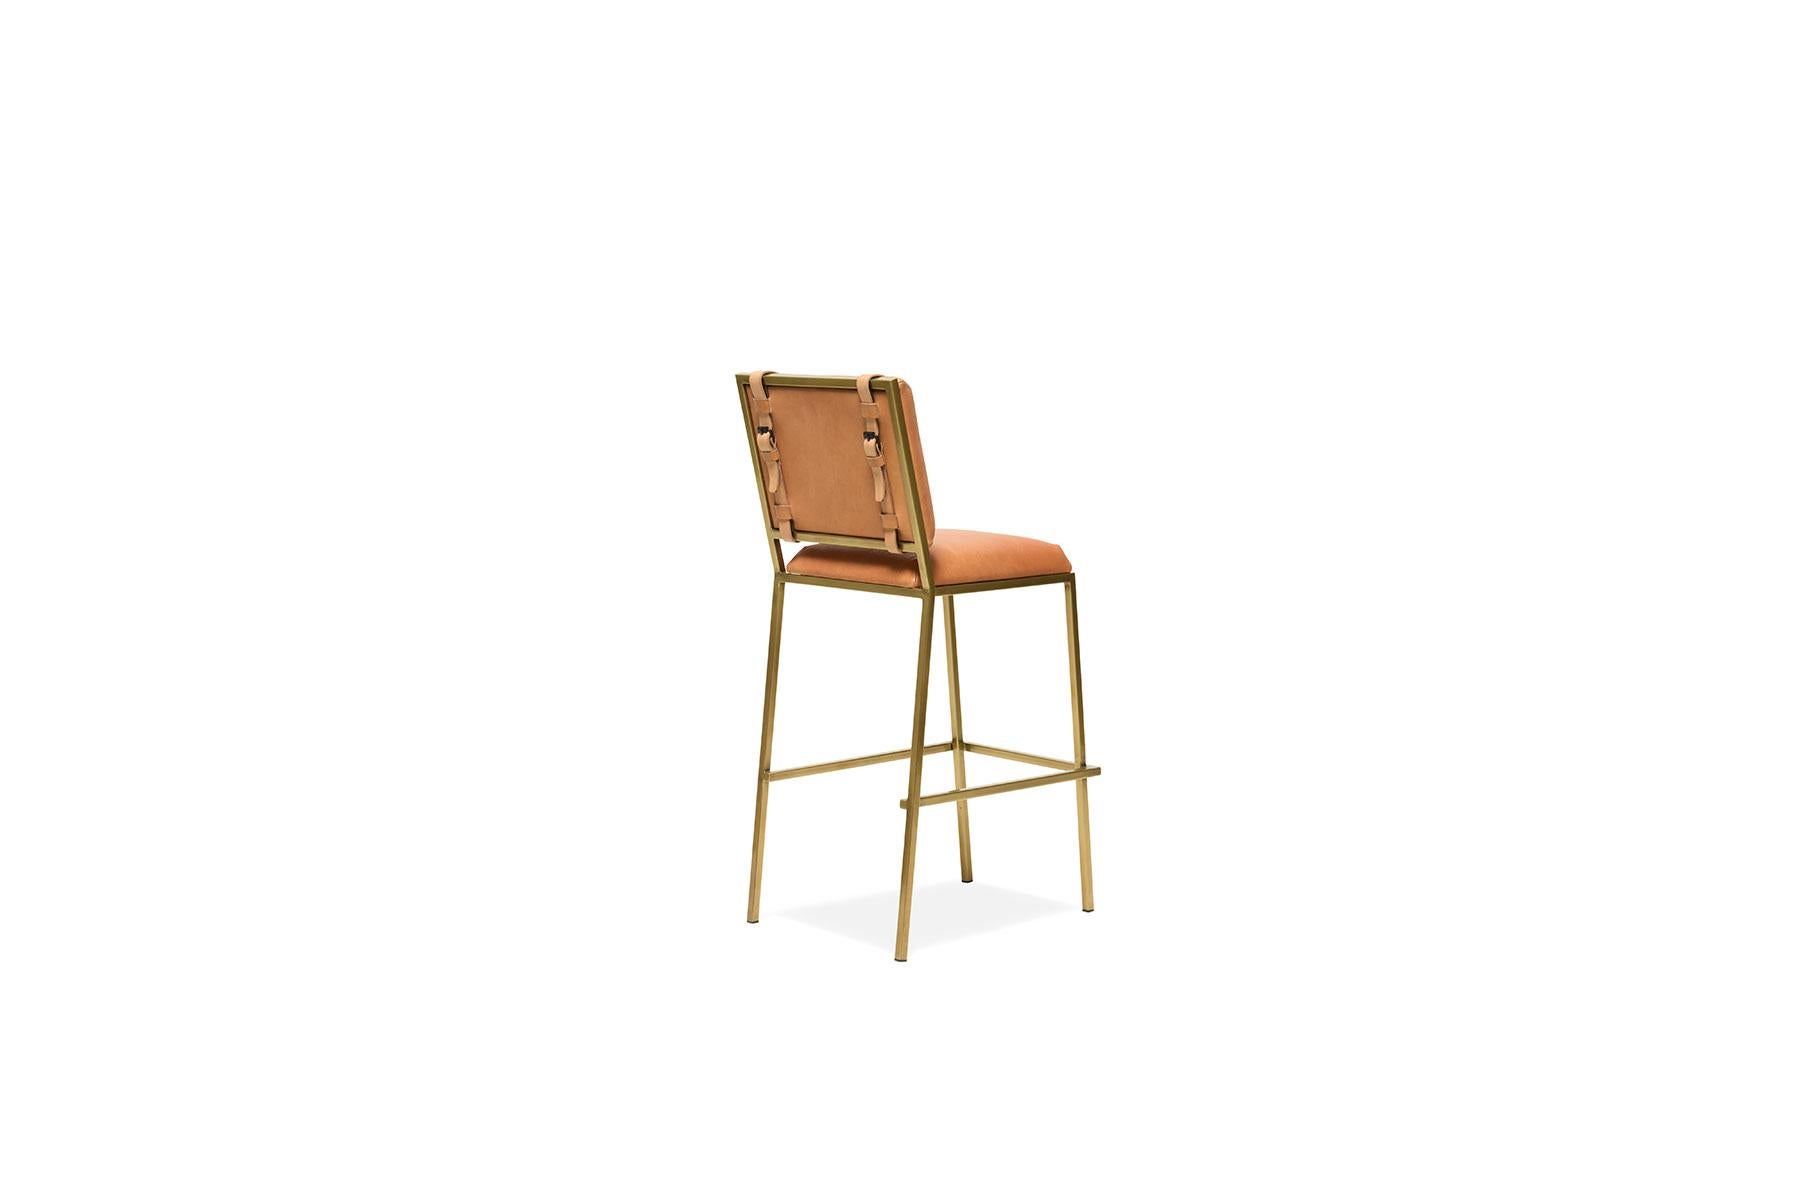 Welded Natural Veg Tan Leather & Antique Brass Barstool For Sale